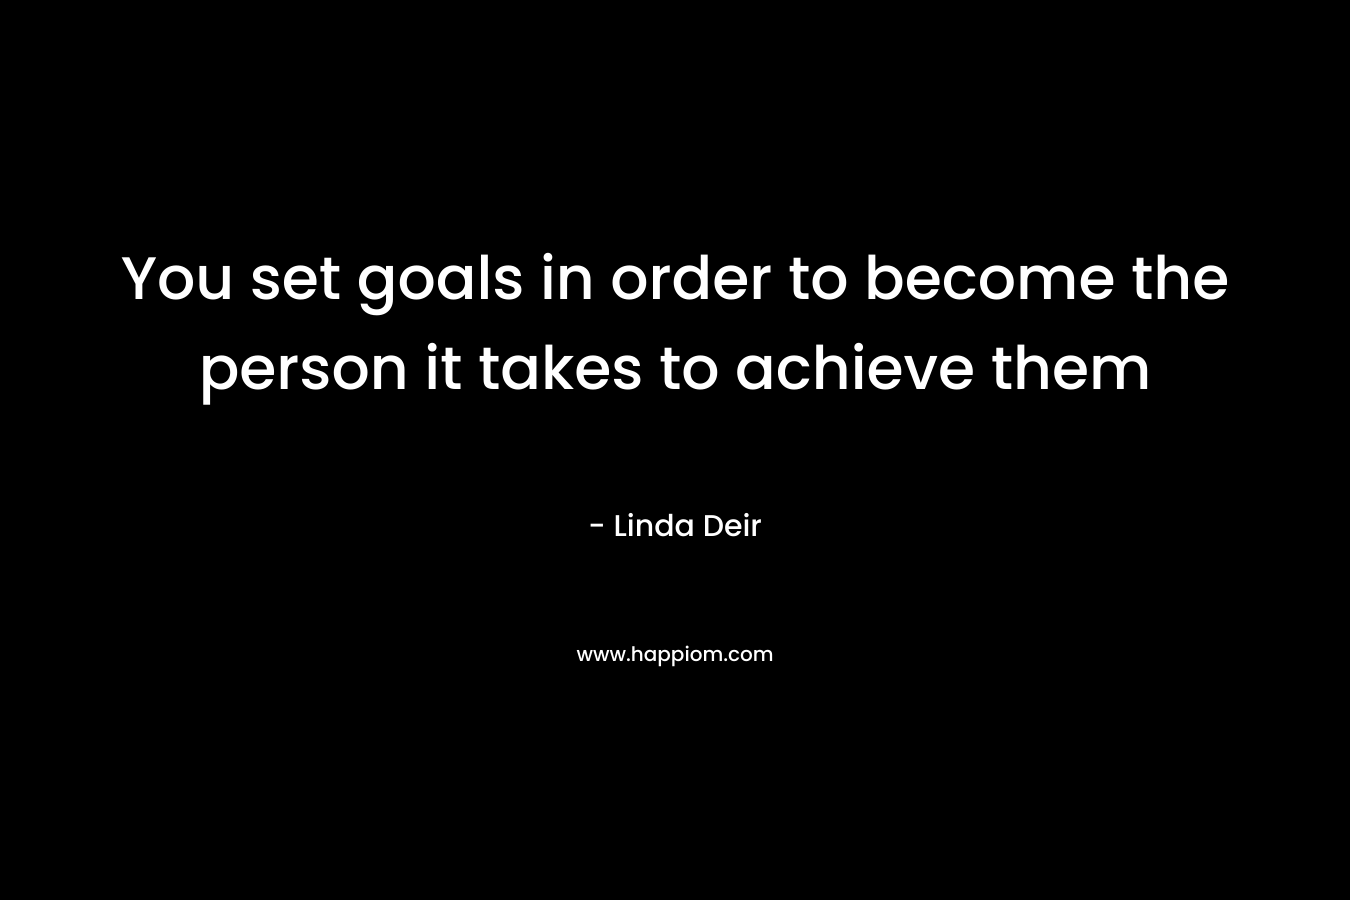 You set goals in order to become the person it takes to achieve them